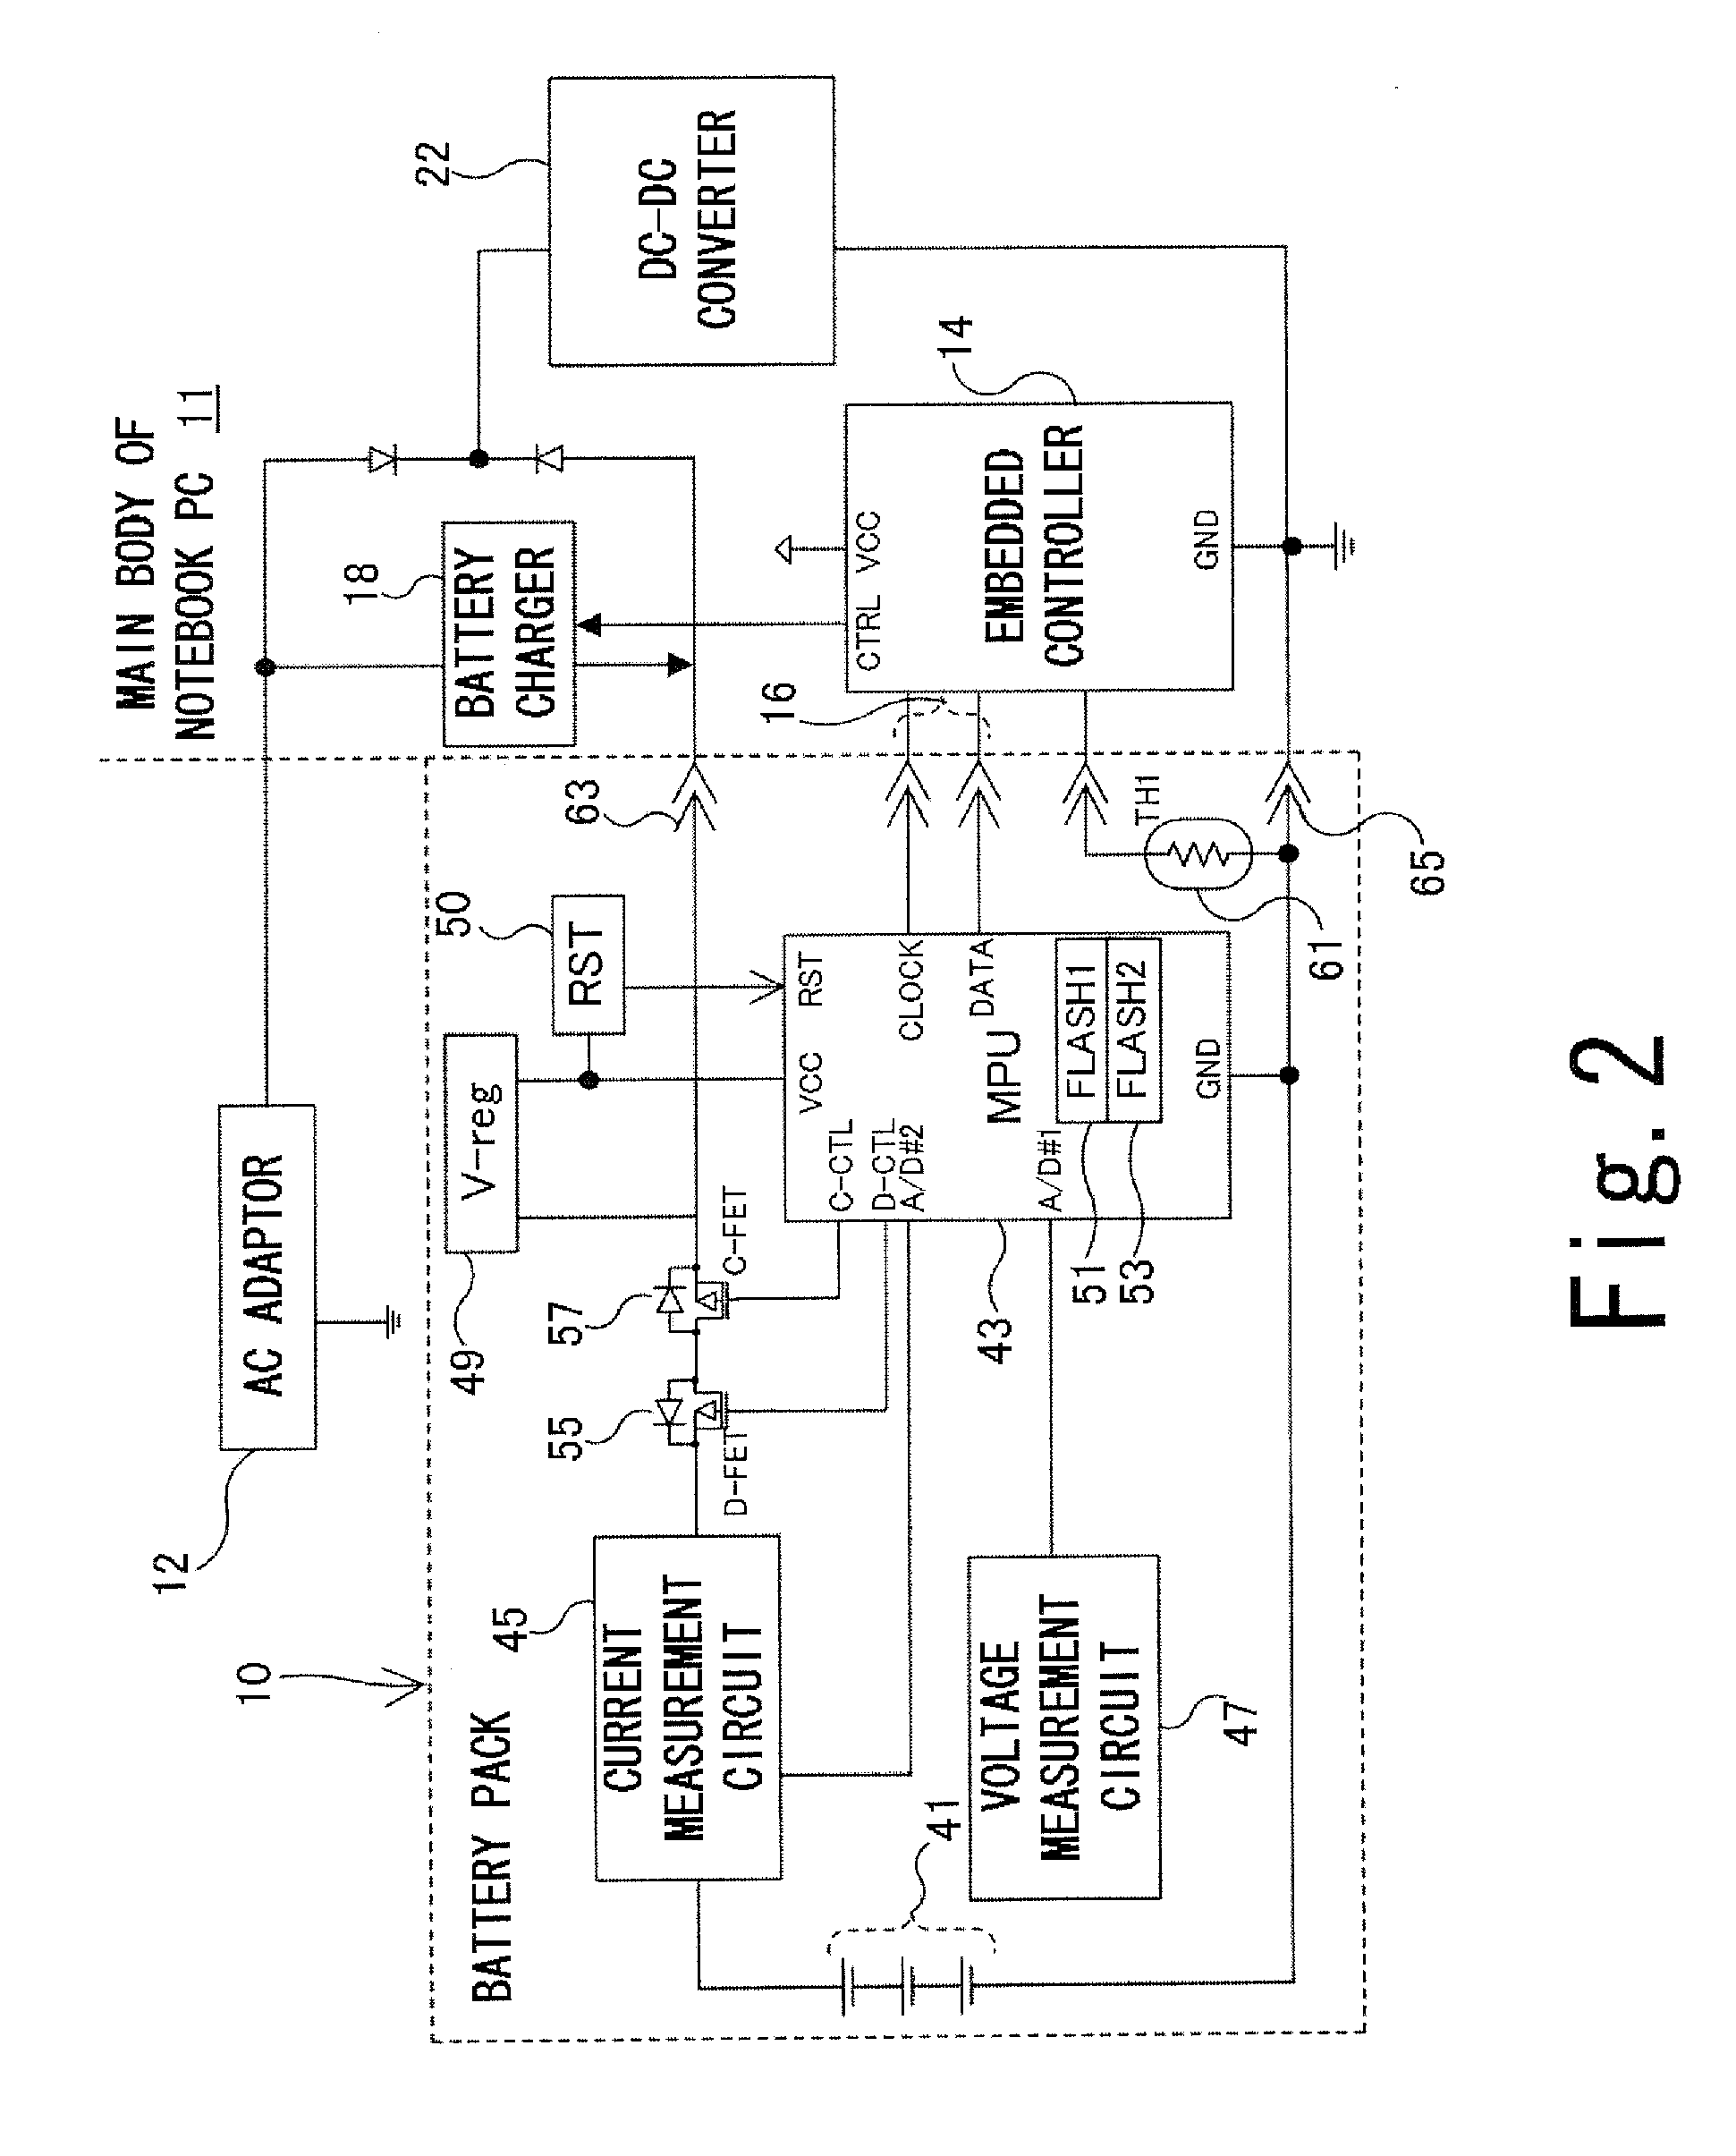 Battery pack and method for permanently disabling battery pack functions